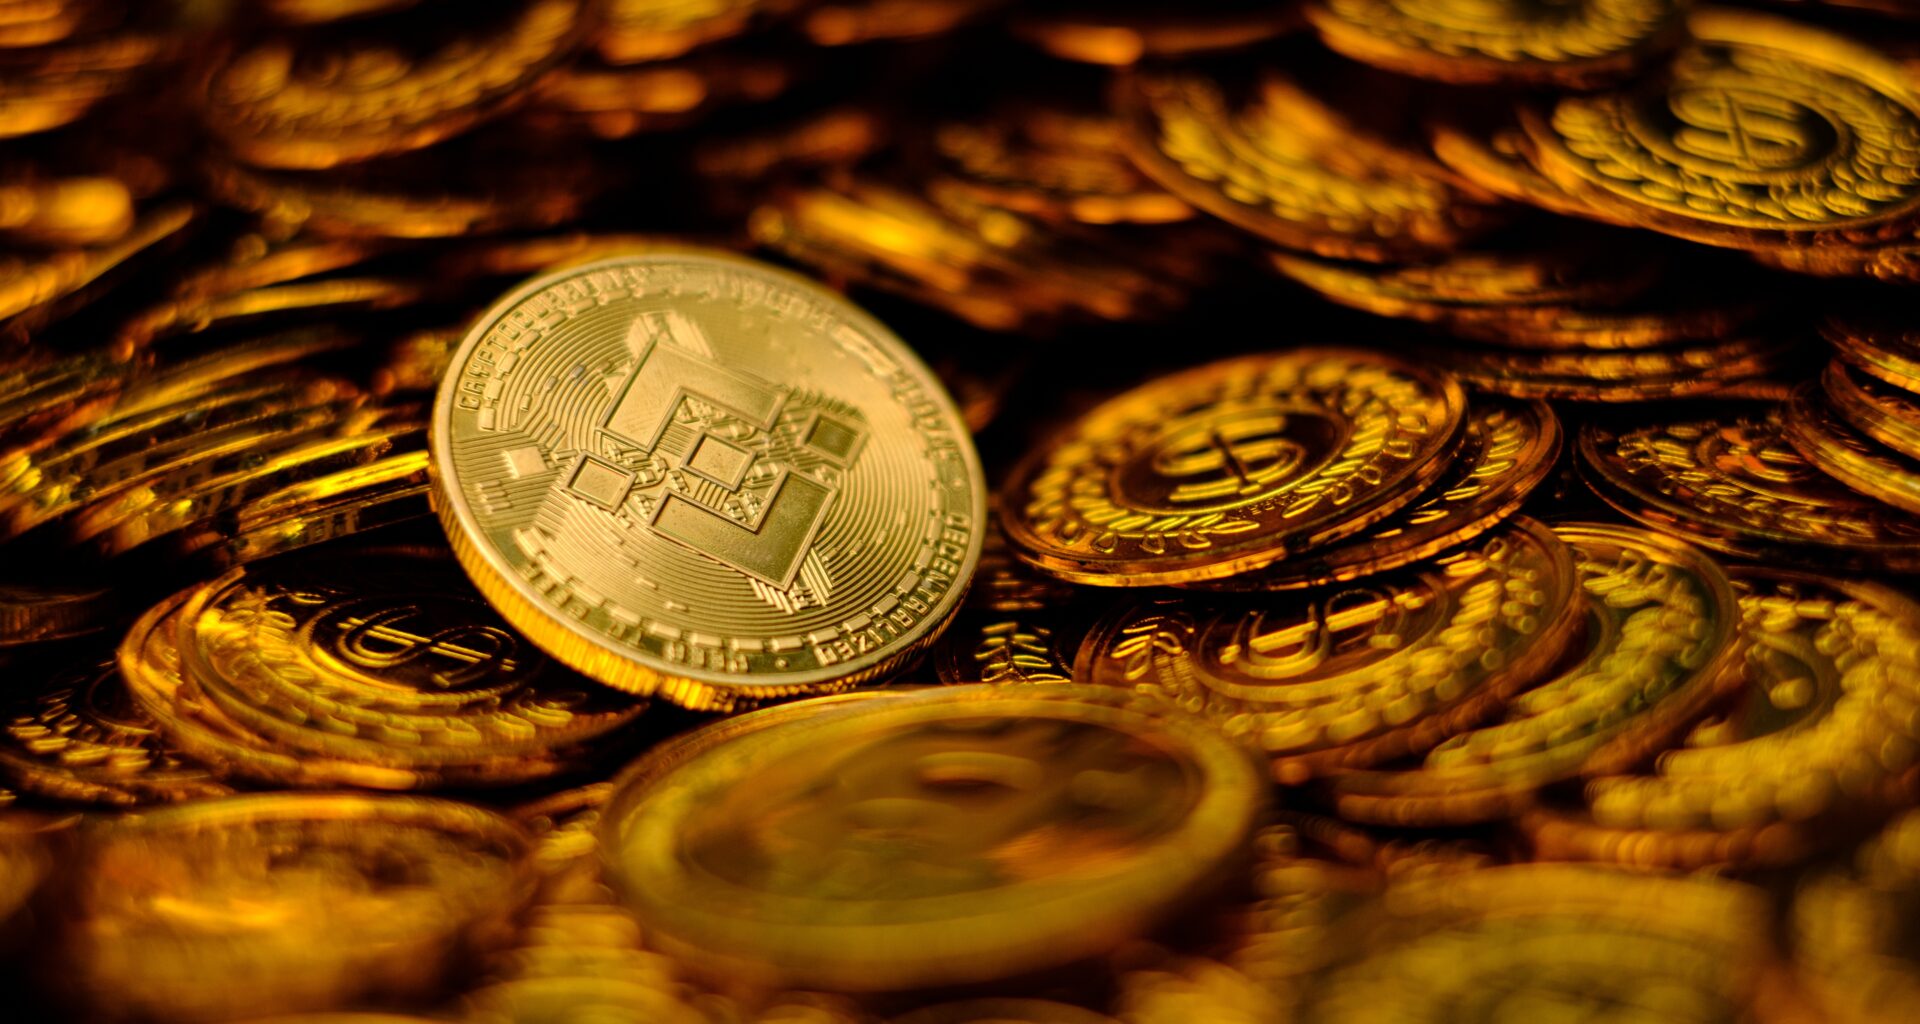 A gold Binance coin sits on top of a pile of other gold coins.